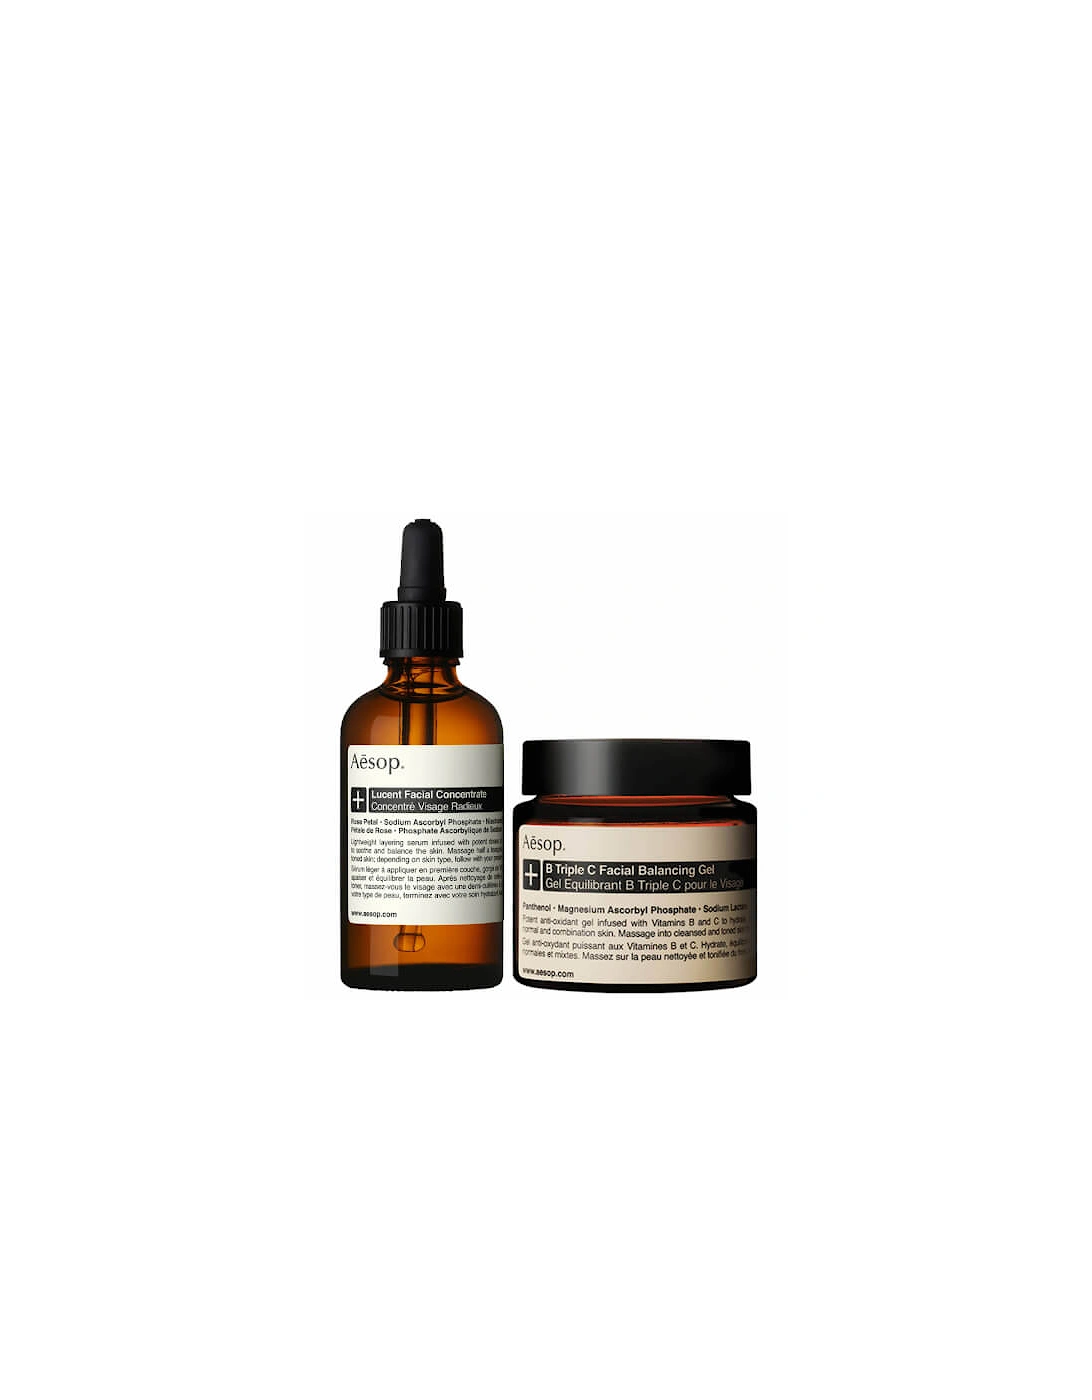 Lucent Concentrate and Triple C Balancing Gel Duo (Worth £170.00) - Aesop, 2 of 1